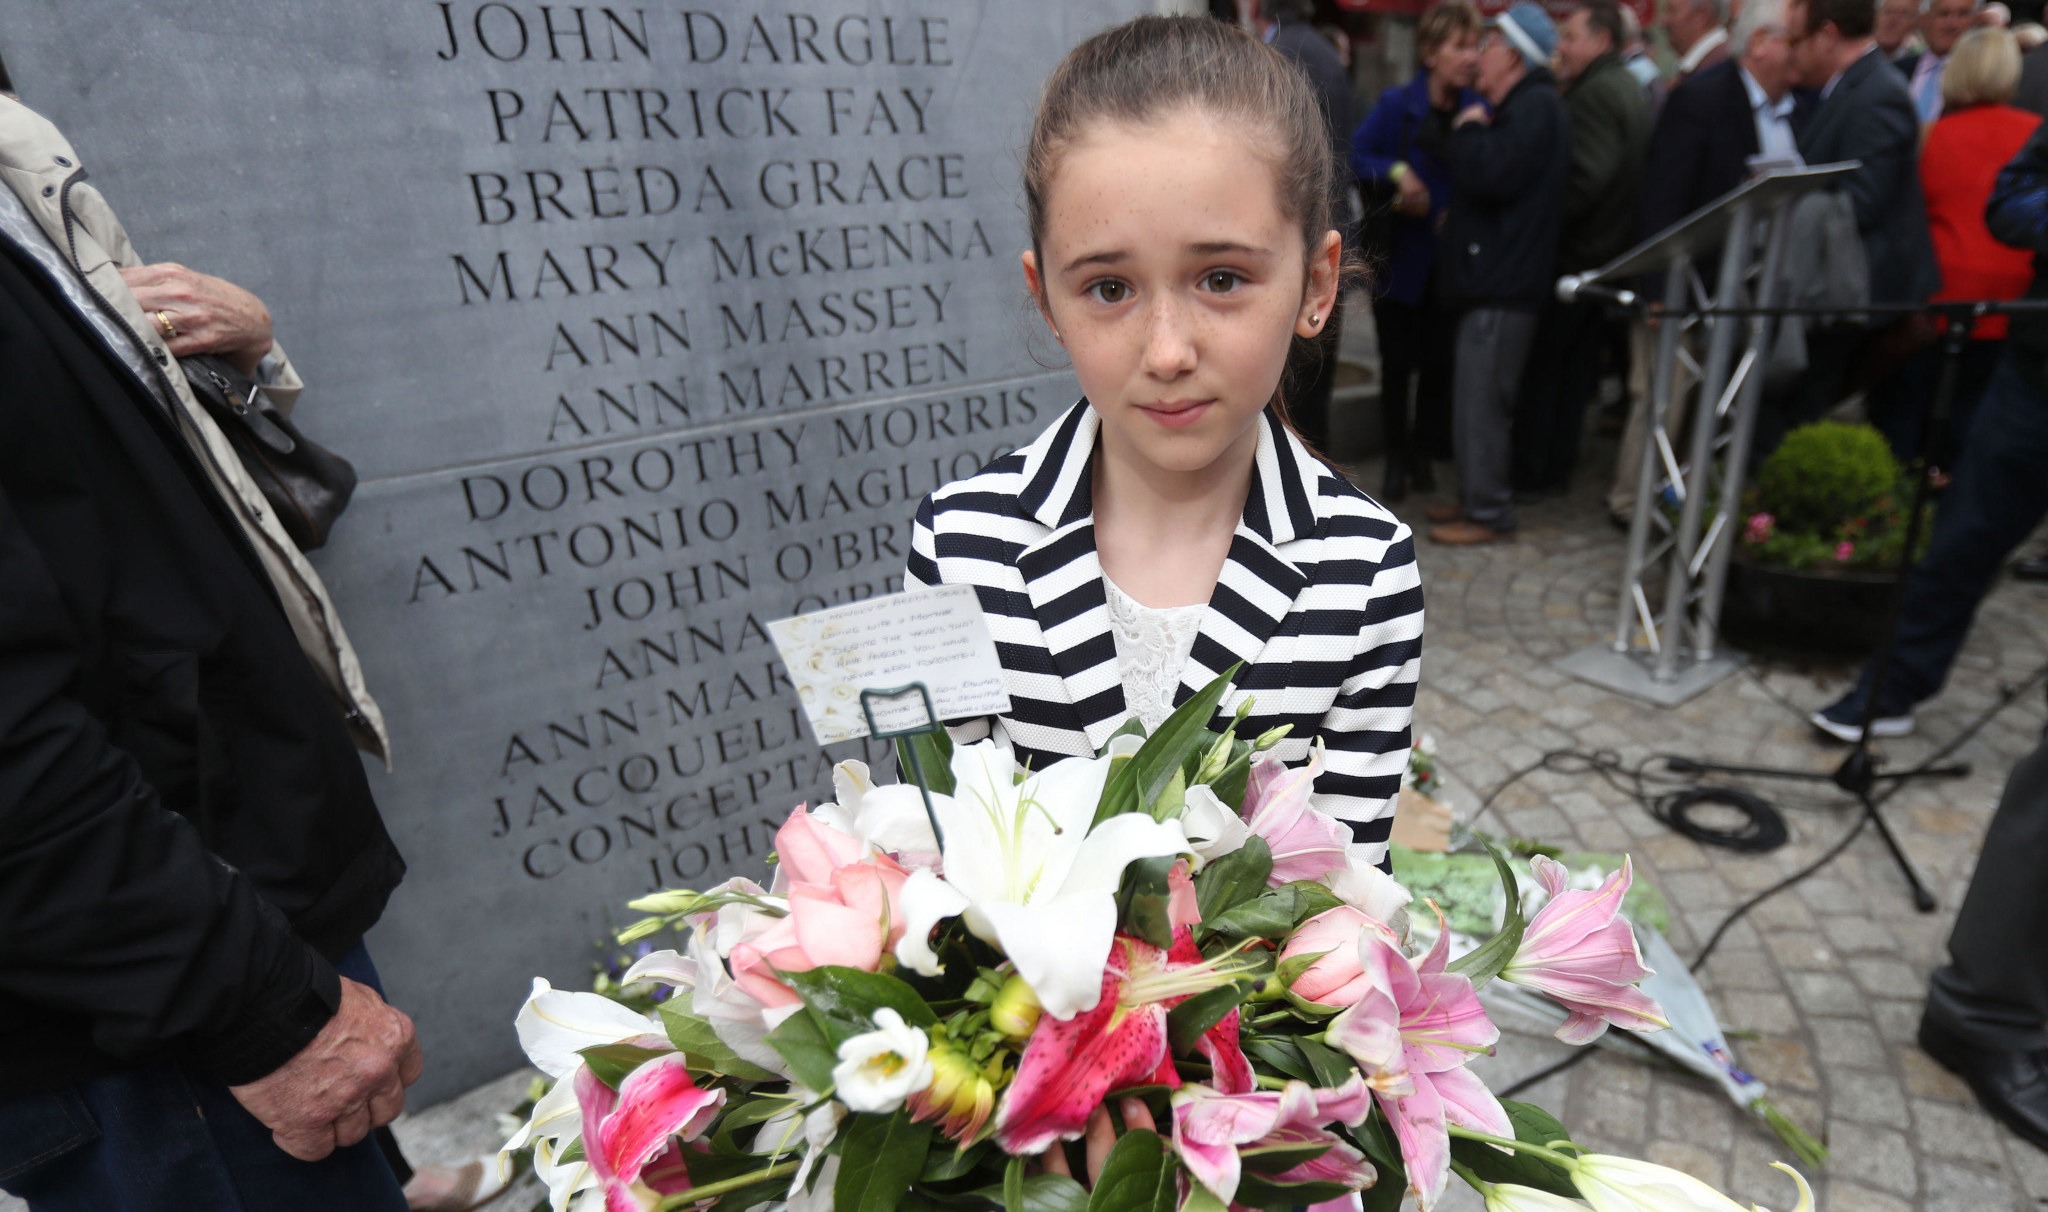 Roseanna Grace, whose grandmother Breda was killed in the attack, attends a memorial service. (Photo: Niall Carson via Alamy)